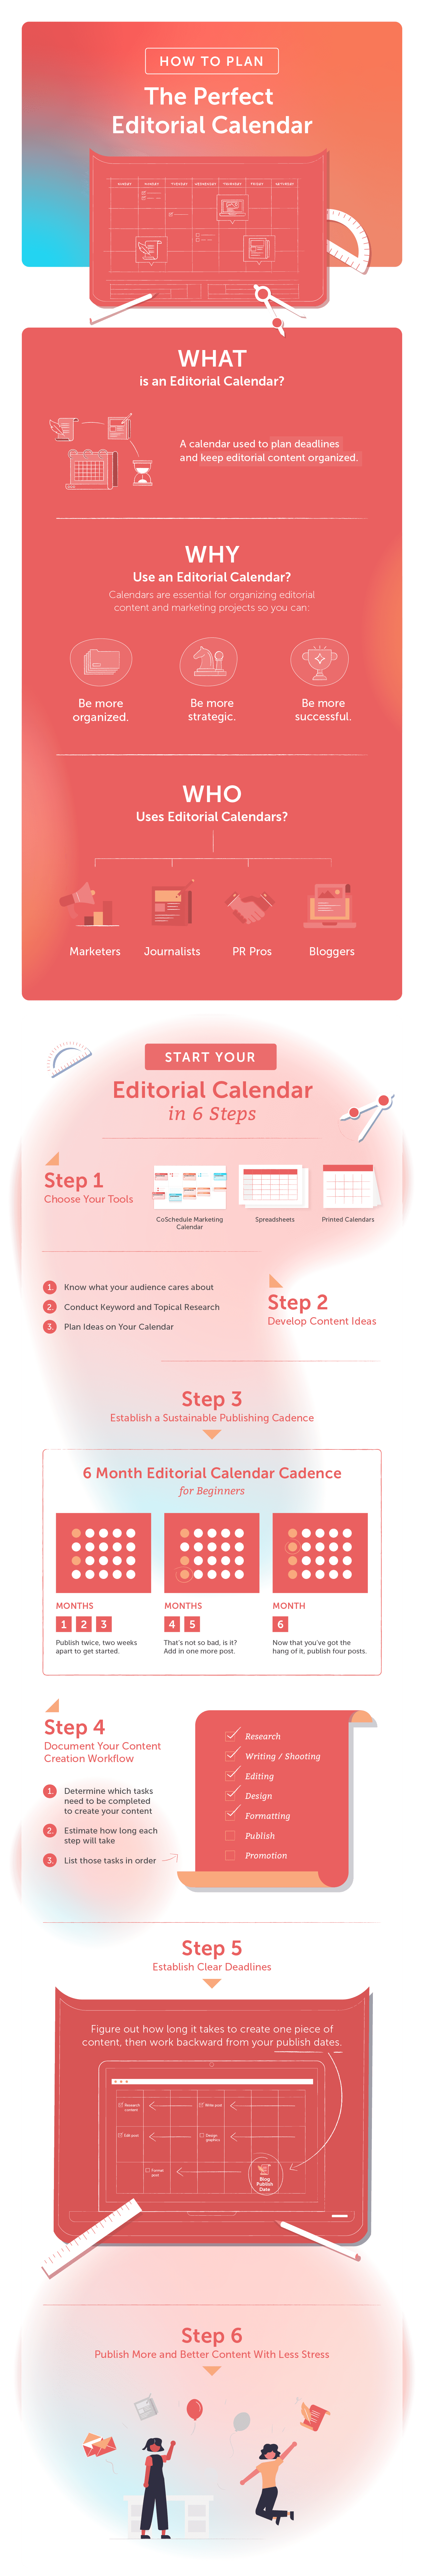 How to plan an editorial calendar- Step-by-Step